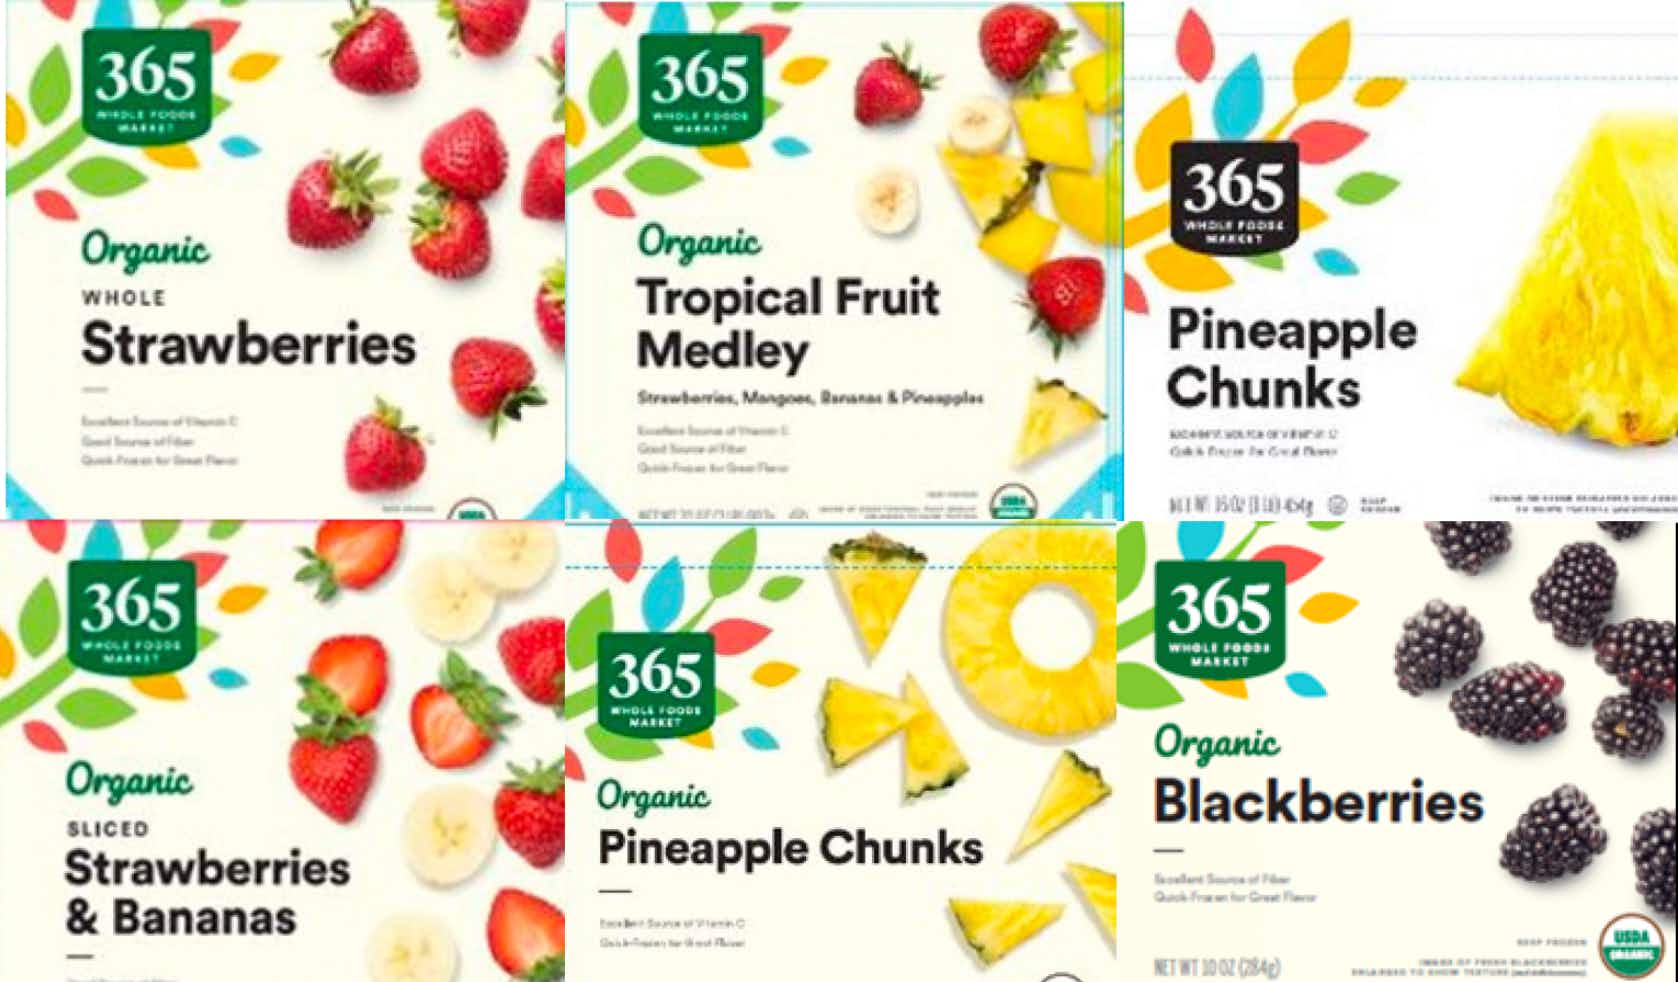 A group of recalled frozen fruit products from Whole Foods